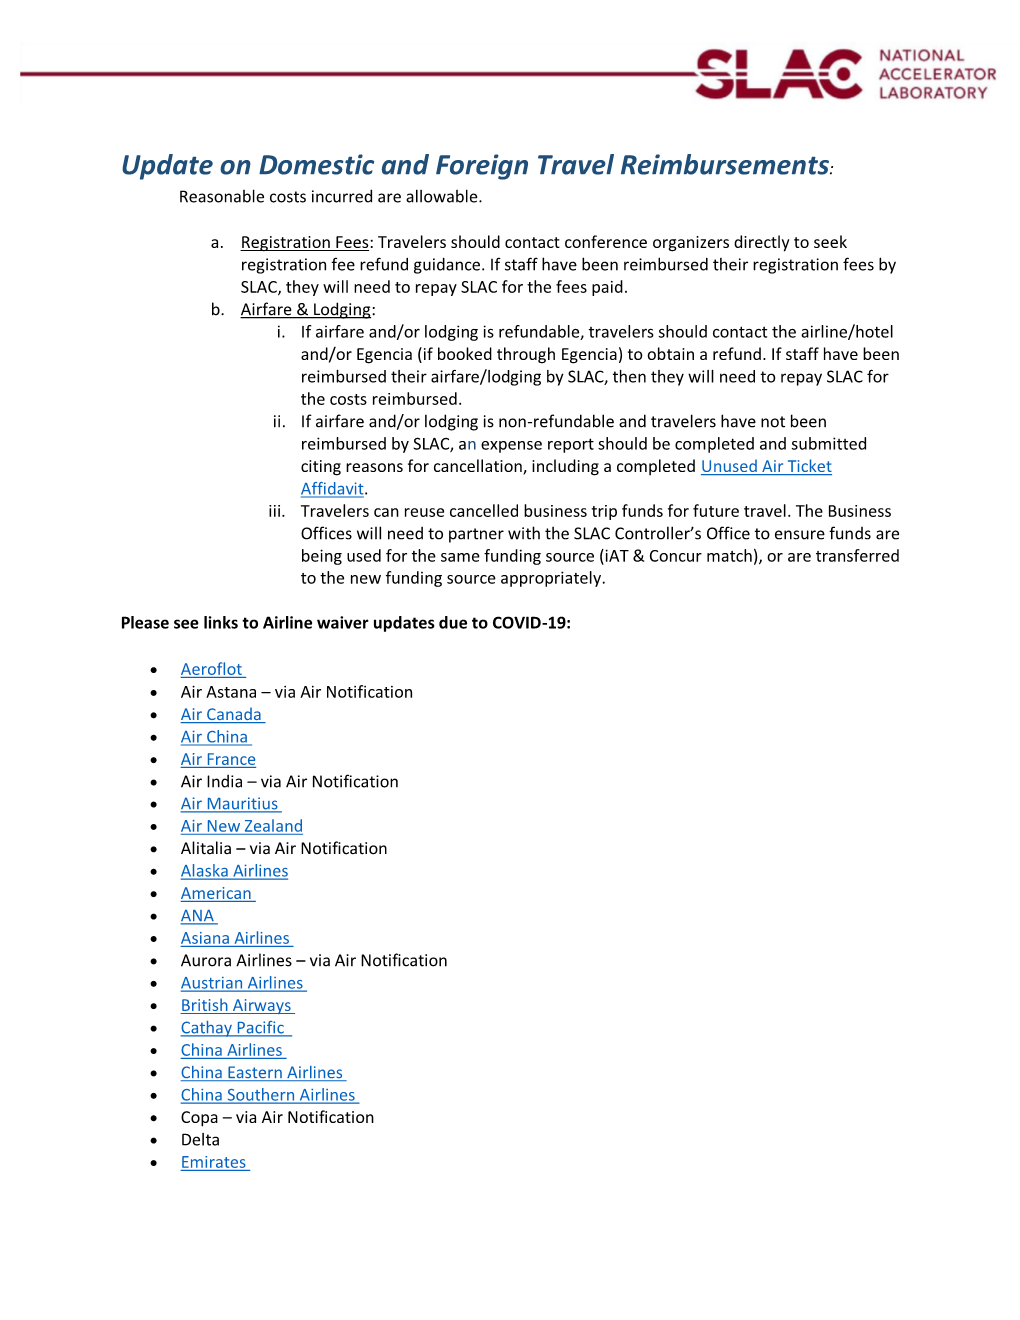 Update on Domestic and Foreign Travel Reimbursements: Reasonable Costs Incurred Are Allowable